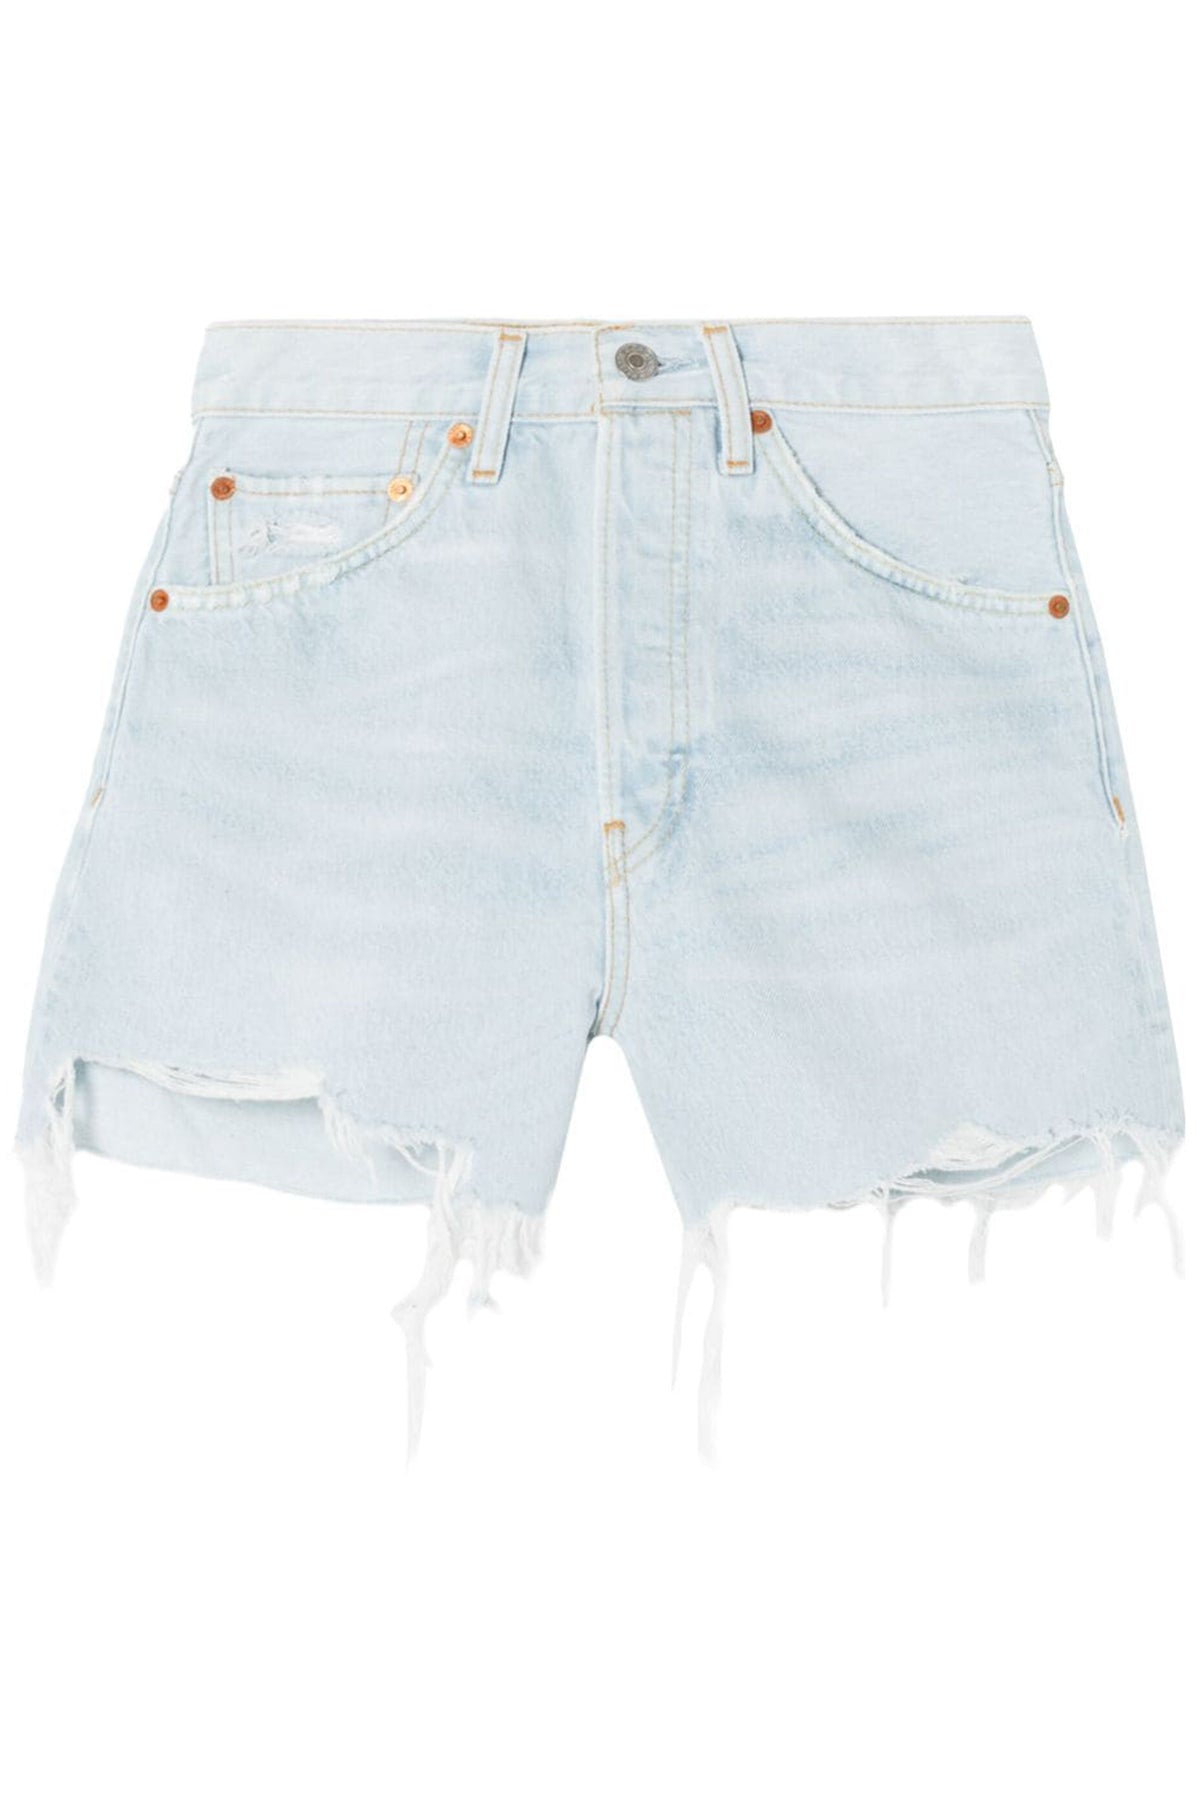 RE/DONE PANTALONE IN DENIM  JEANS CHIARO / 23 Shorts Bianchi Donna Re/Done